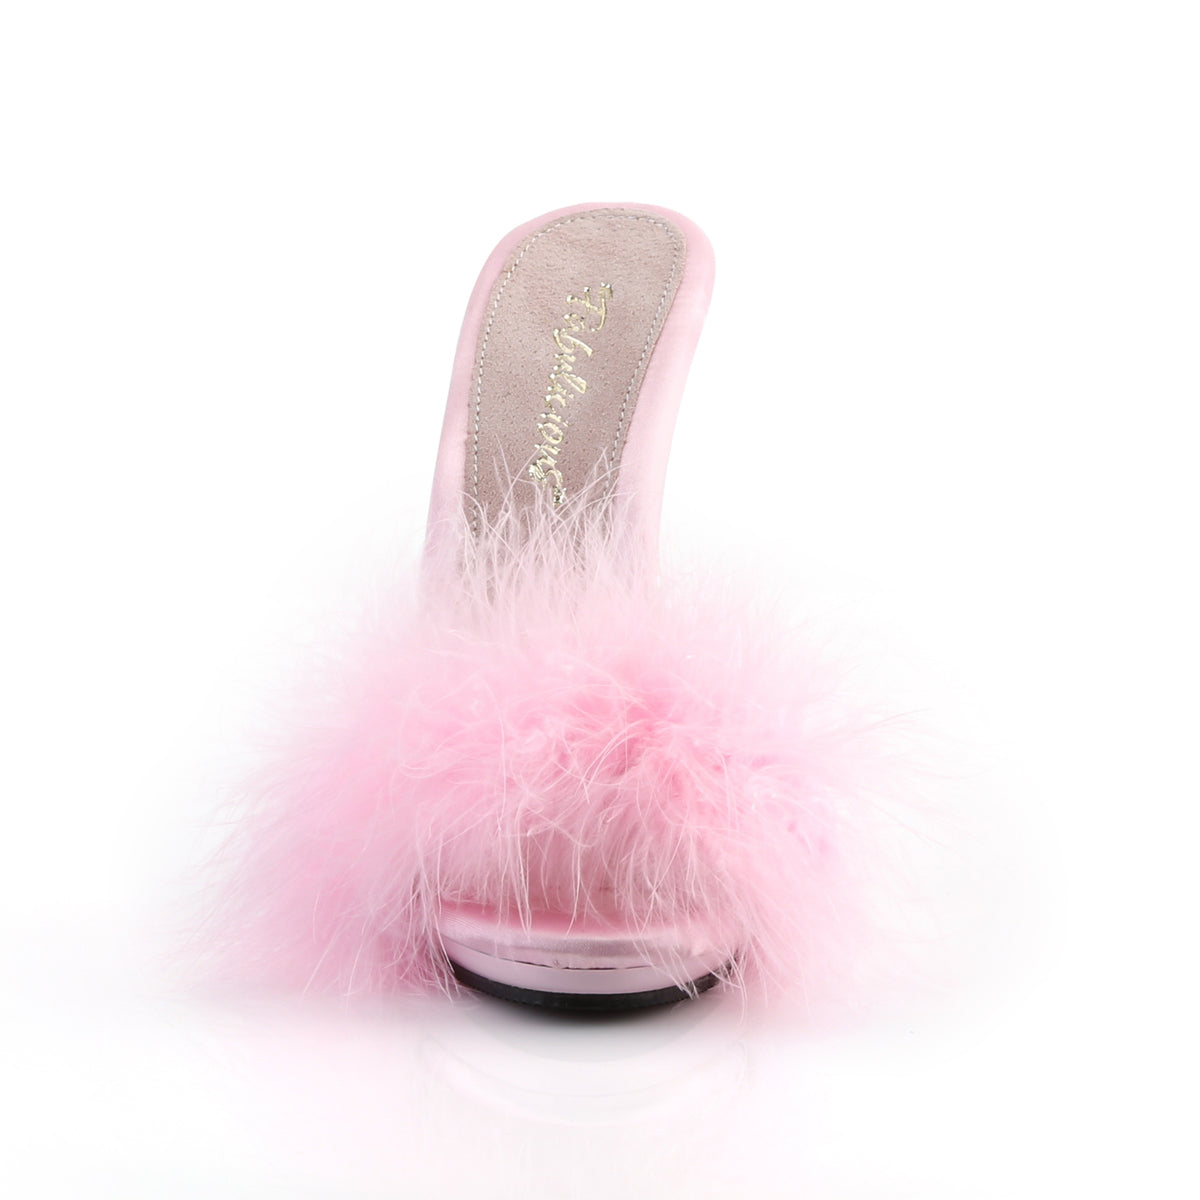 POISE-501F Fabulicious B Pink Satin-Marabou Fur/B Pink Shoes [Sexy Shoes]